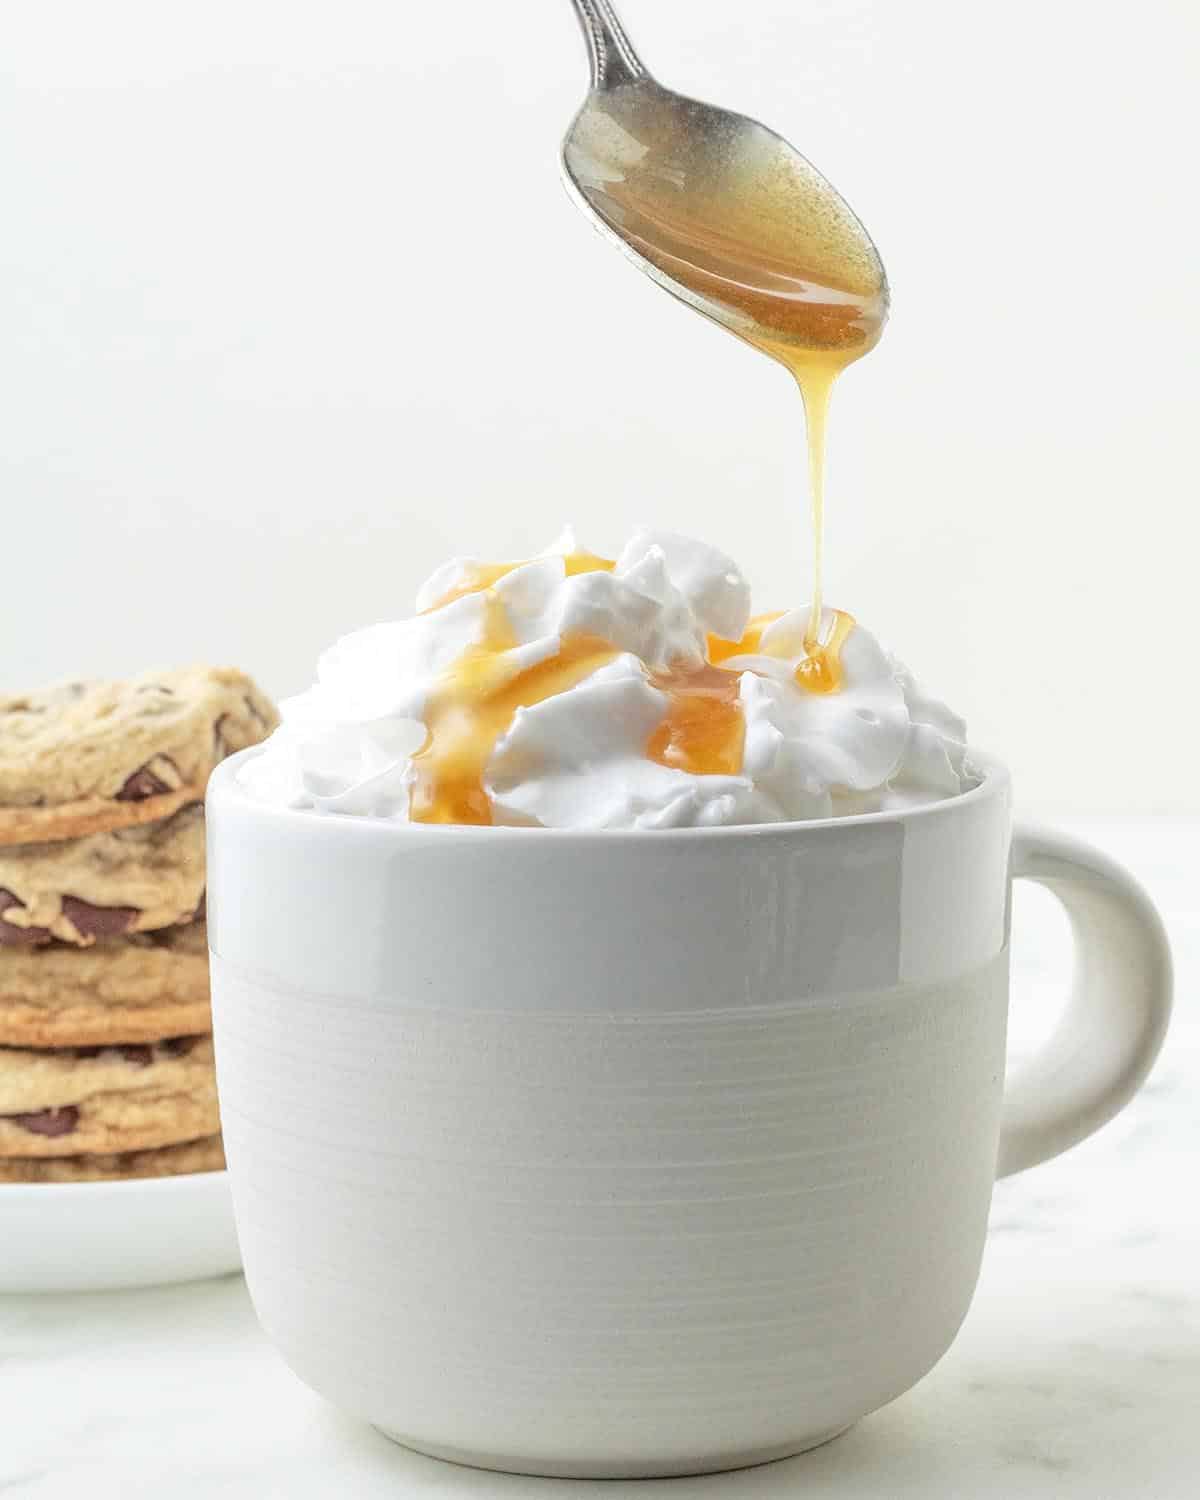 A spoon drizzling maple caramel onto a drink topped with whipped cream.